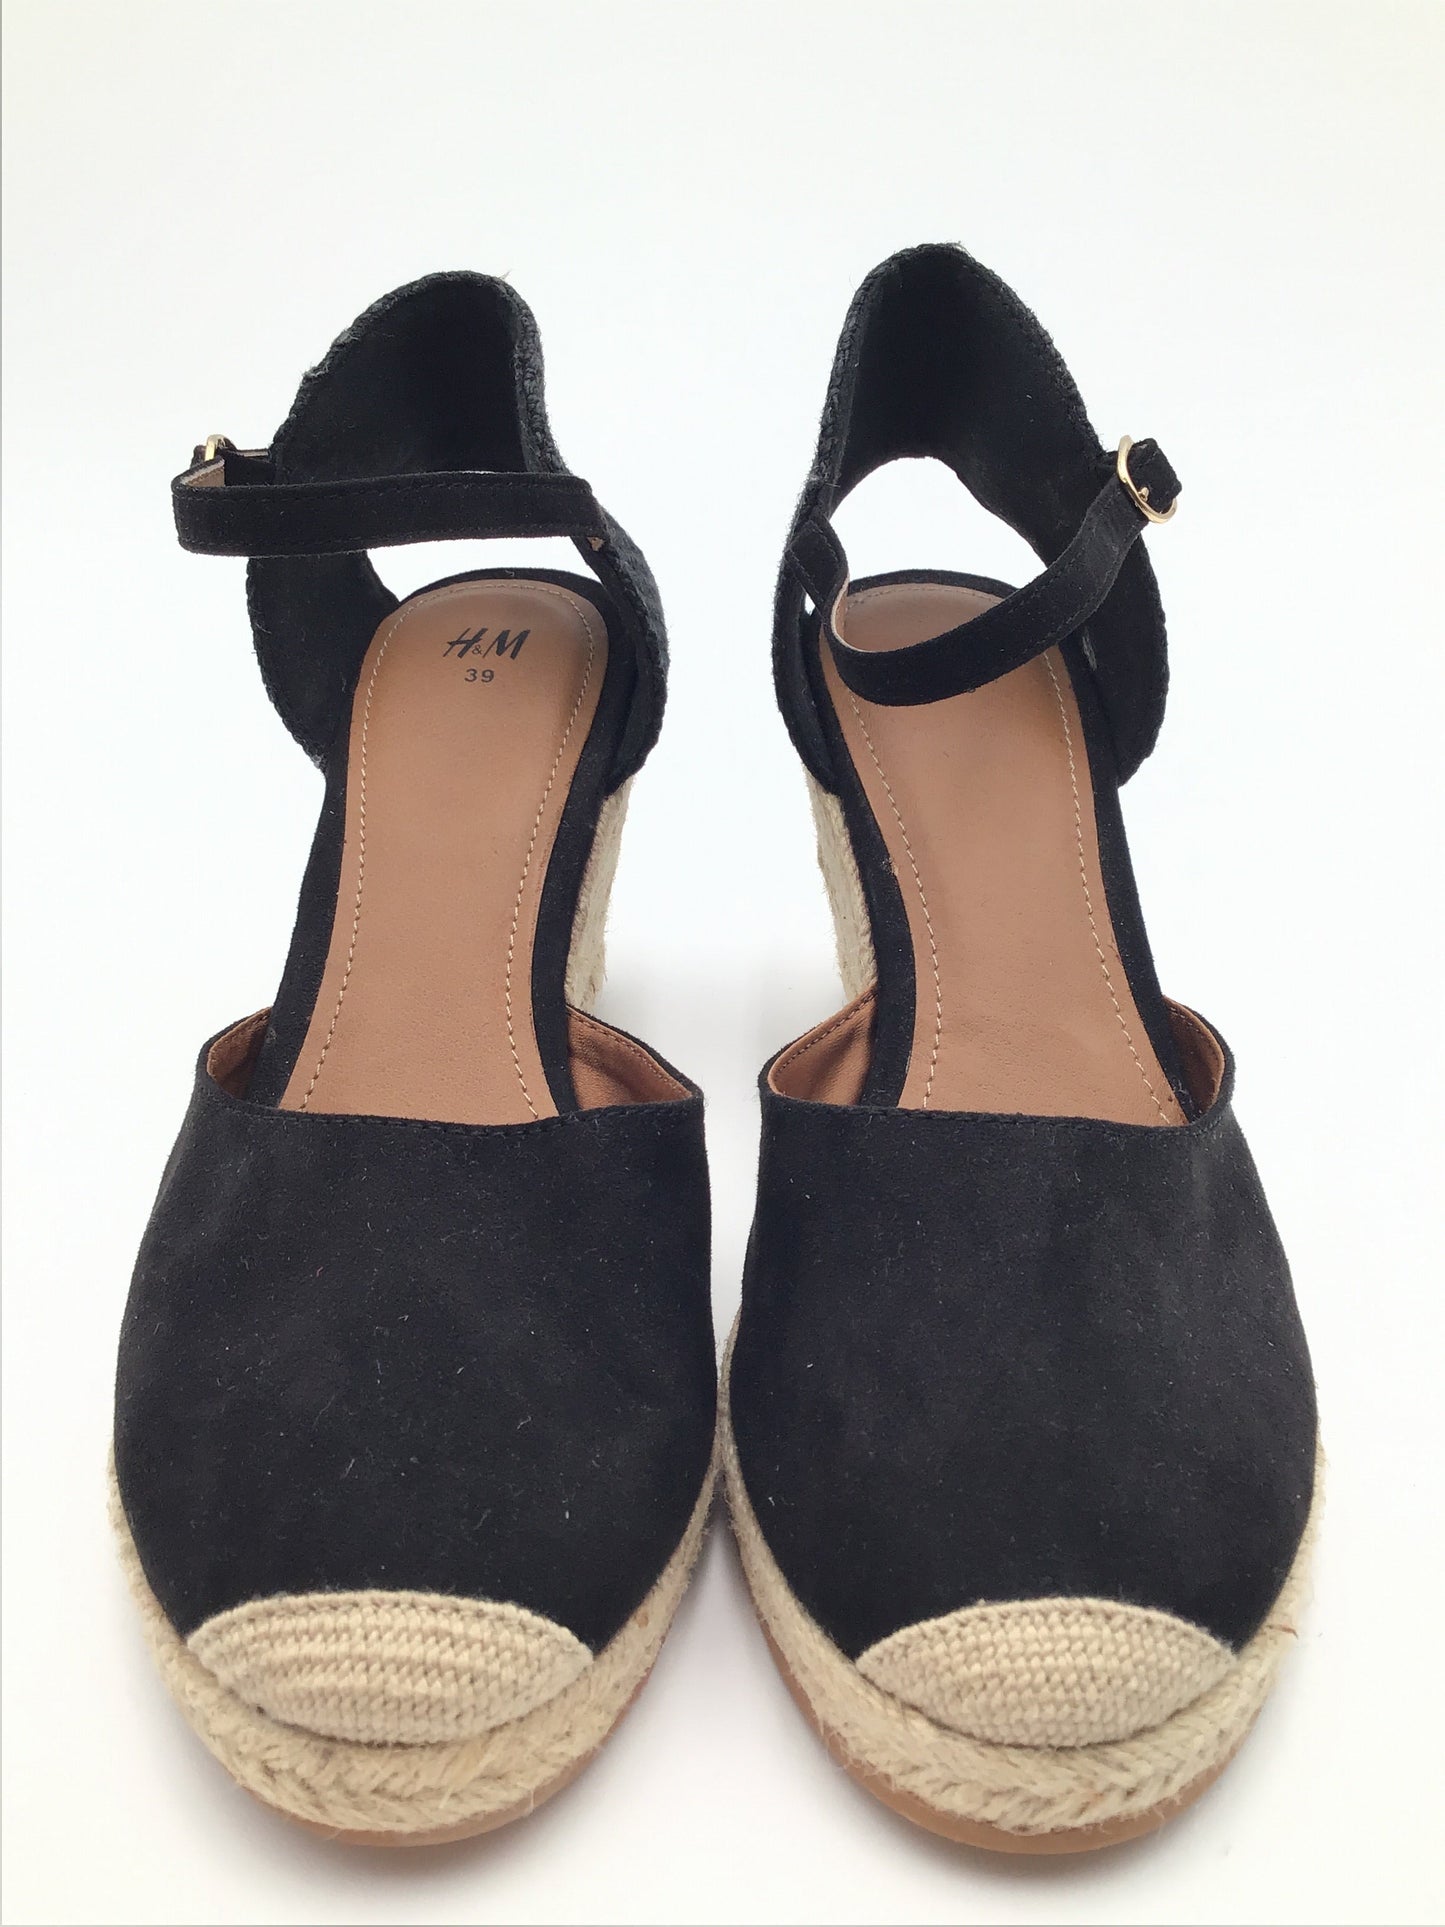 Shoes Heels Espadrille Wedge By H&m  Size: 8.5